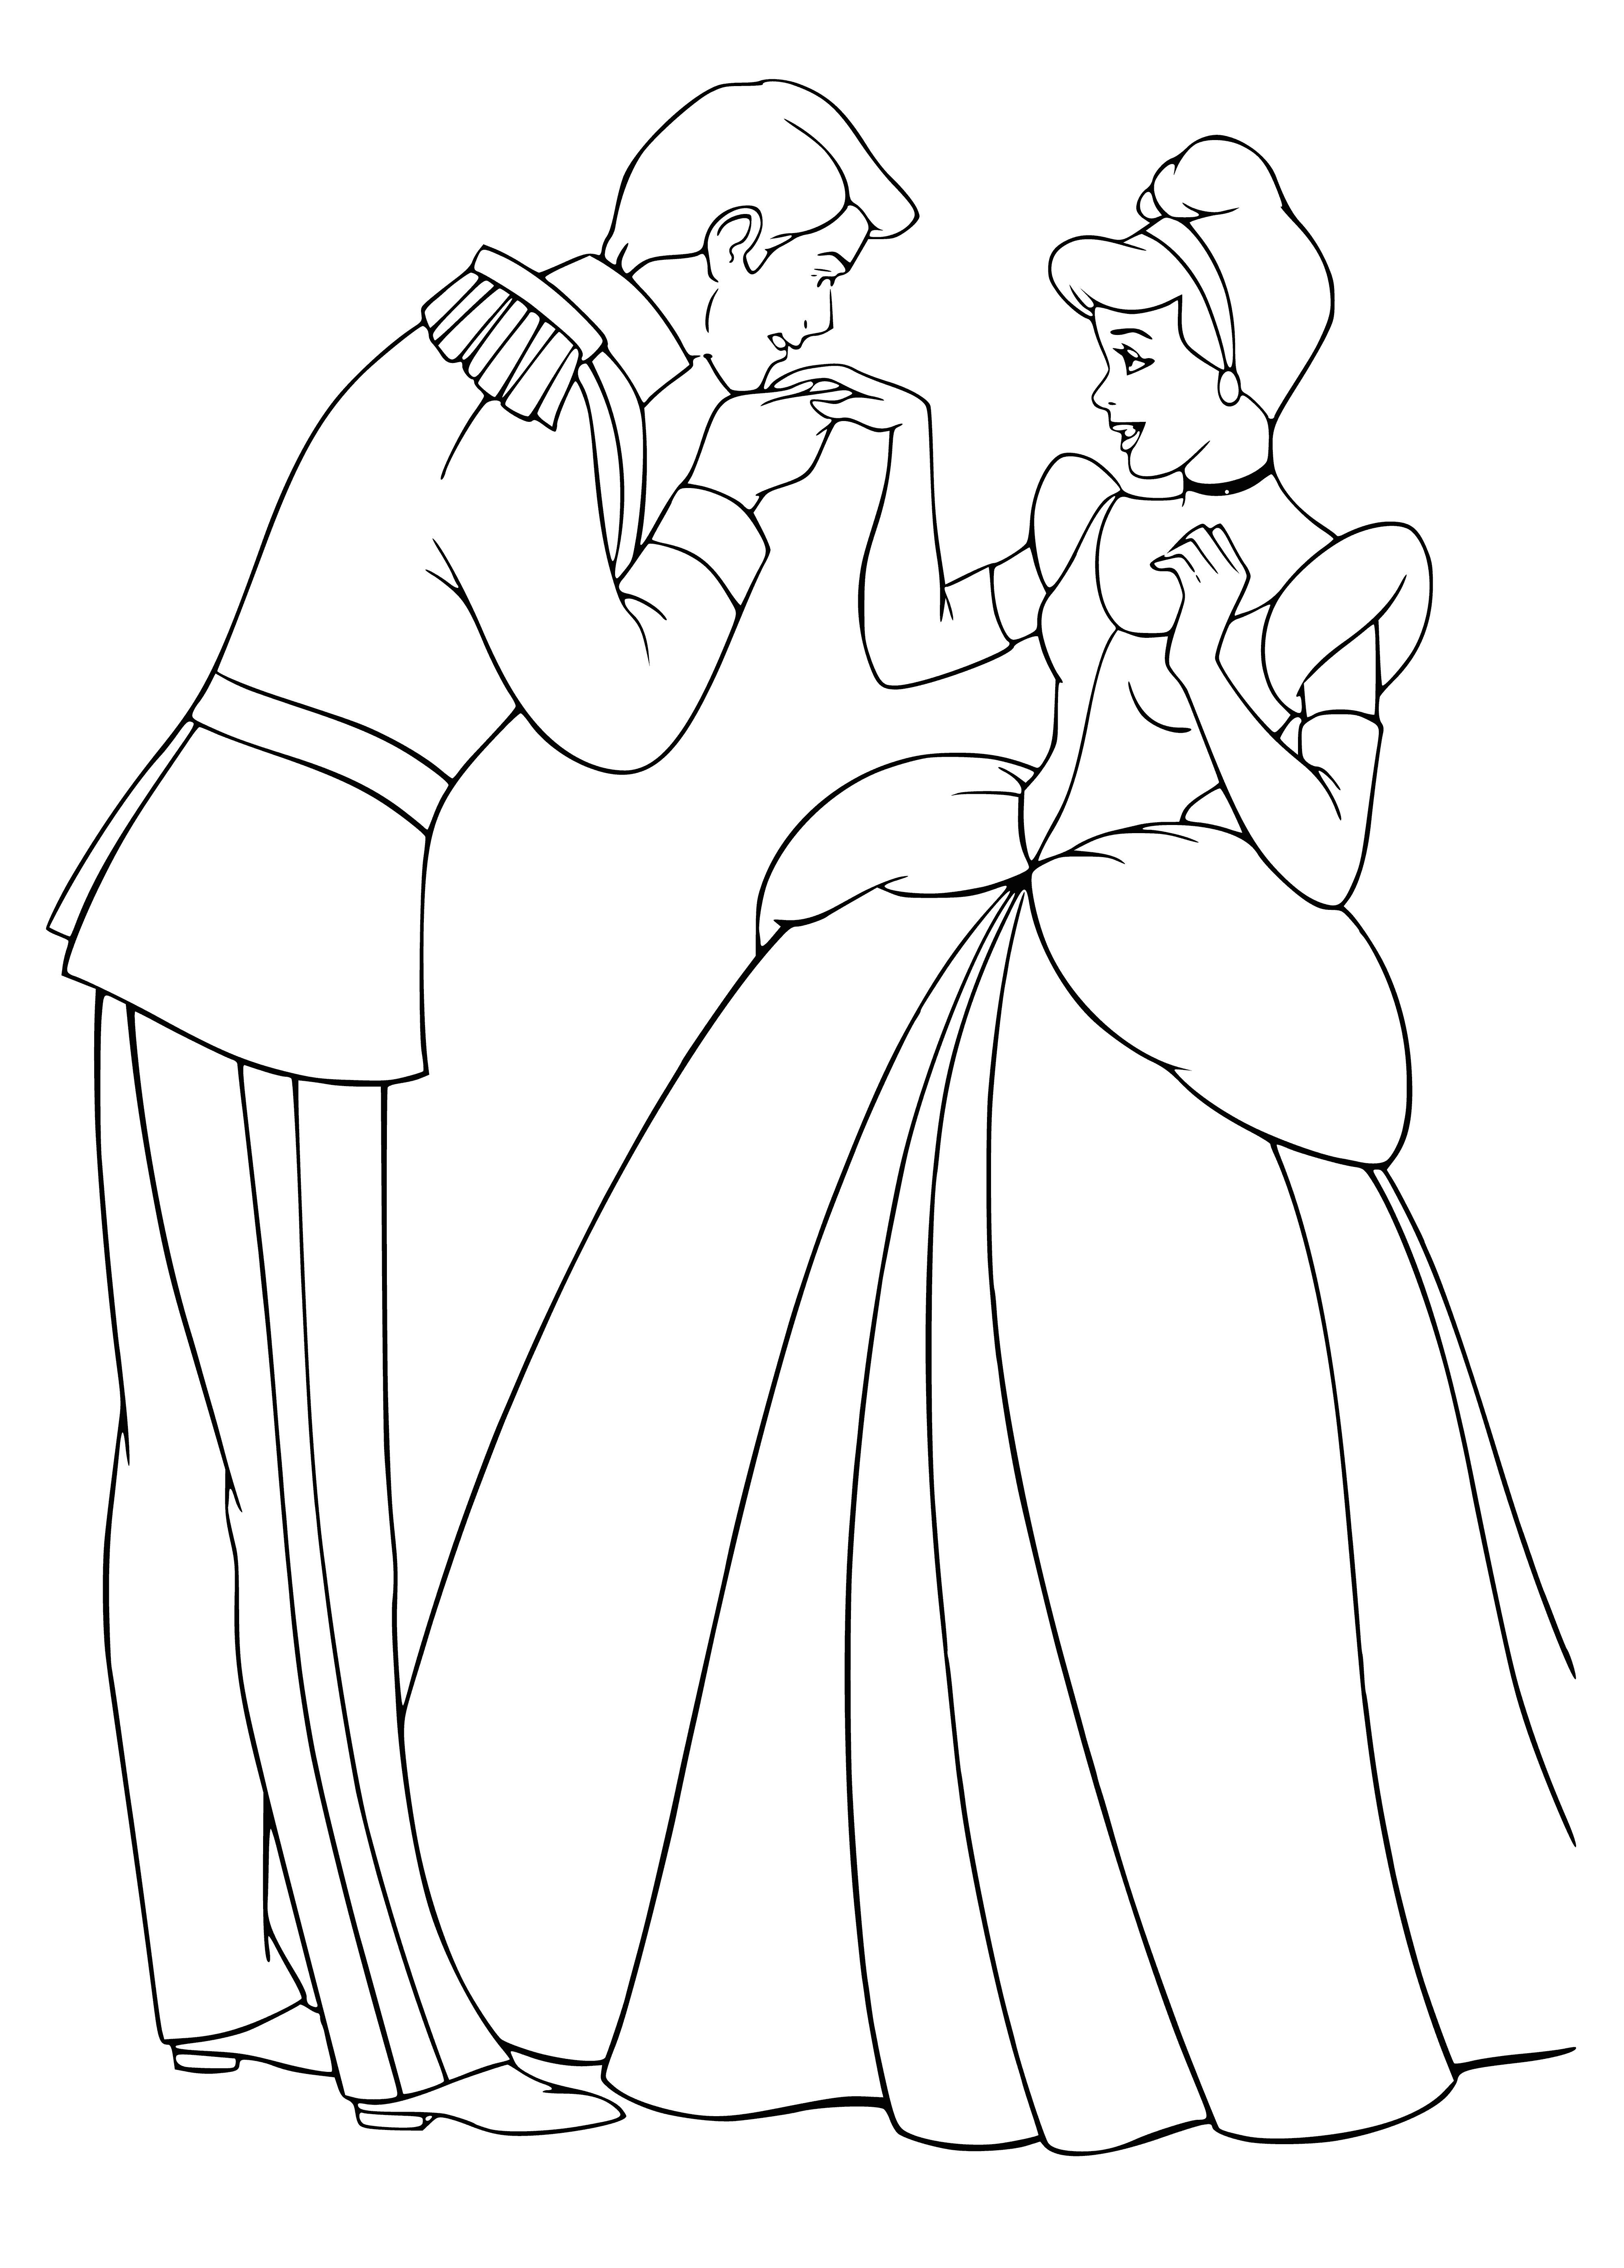 coloring page: Prince and Cinderella happily stand together, both excited to meet each other.